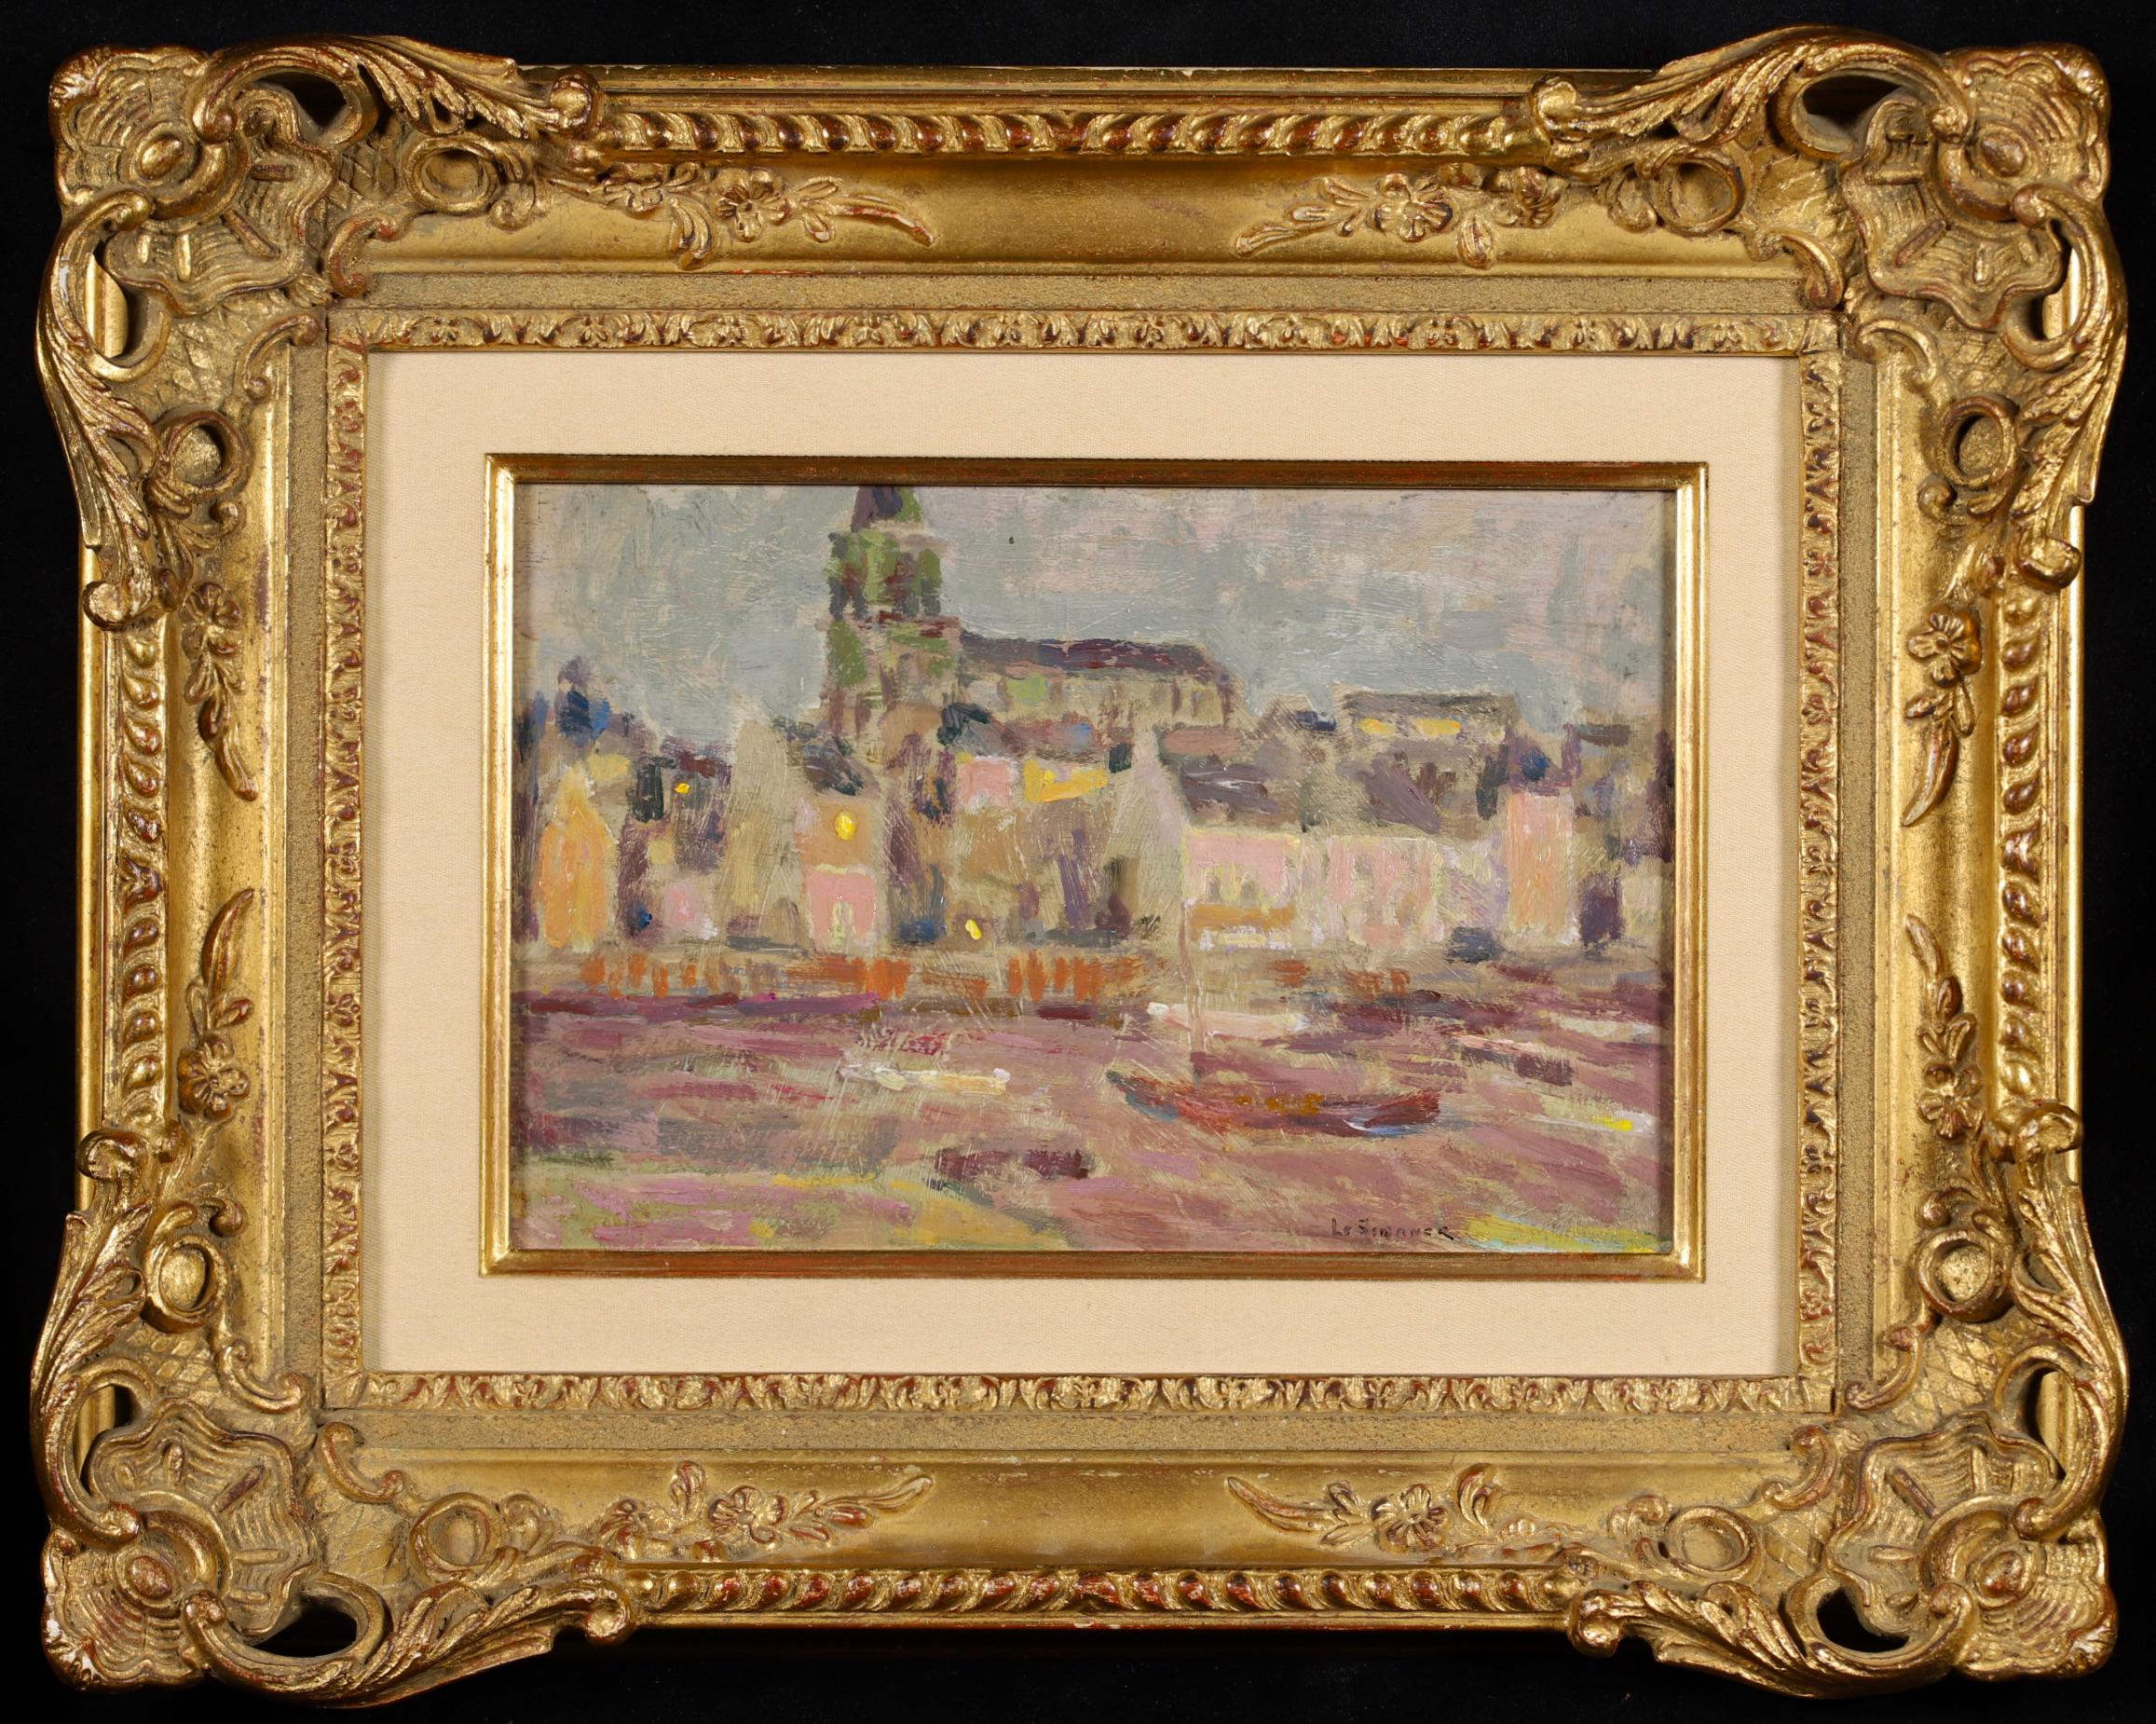 Signed post impressionist landscape oil on panel by French painter Henri le Sidaner. The work depicts a nighttime view of the bay at Saint Servan, Brittany in the north of France. There are boats in the dark waters and lights can be seen in the